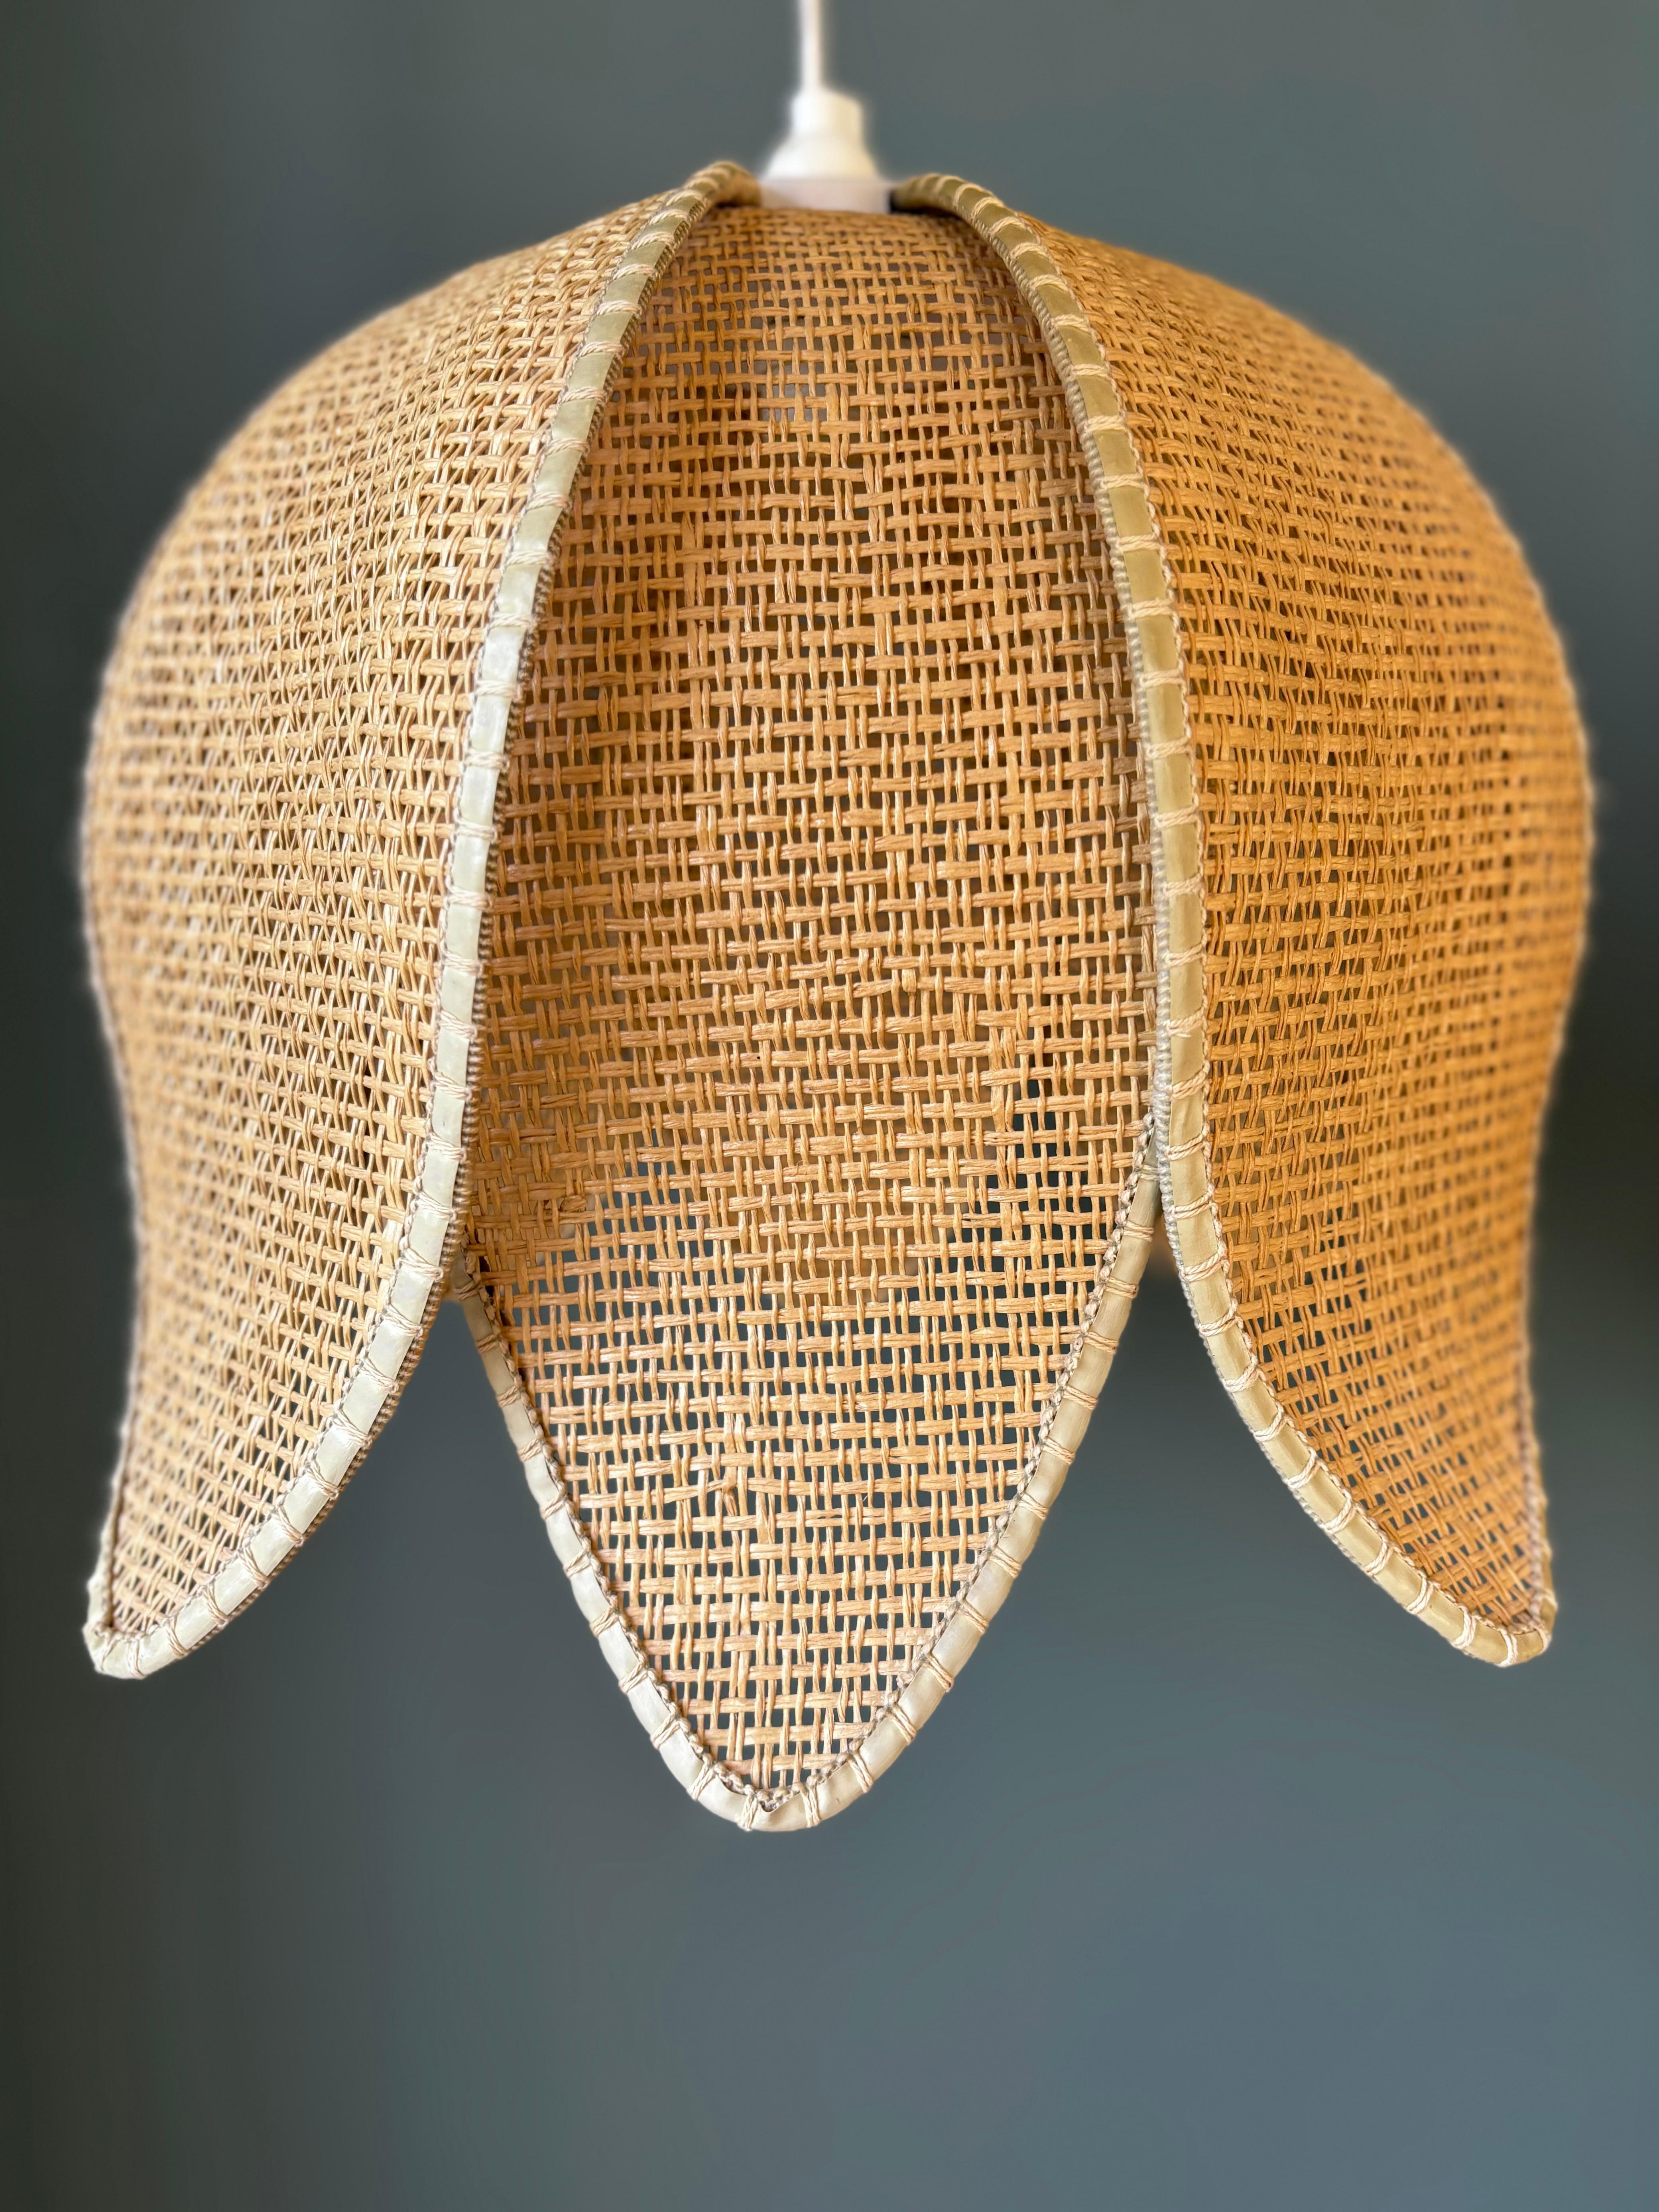 Set of two handmade flower shaped organic modern braided natural warm light brown rattan pendant. Eight layered sides with beige colored edges and matching light brown thread to form a soft organic modern shape. New wiring and white fitting for E27